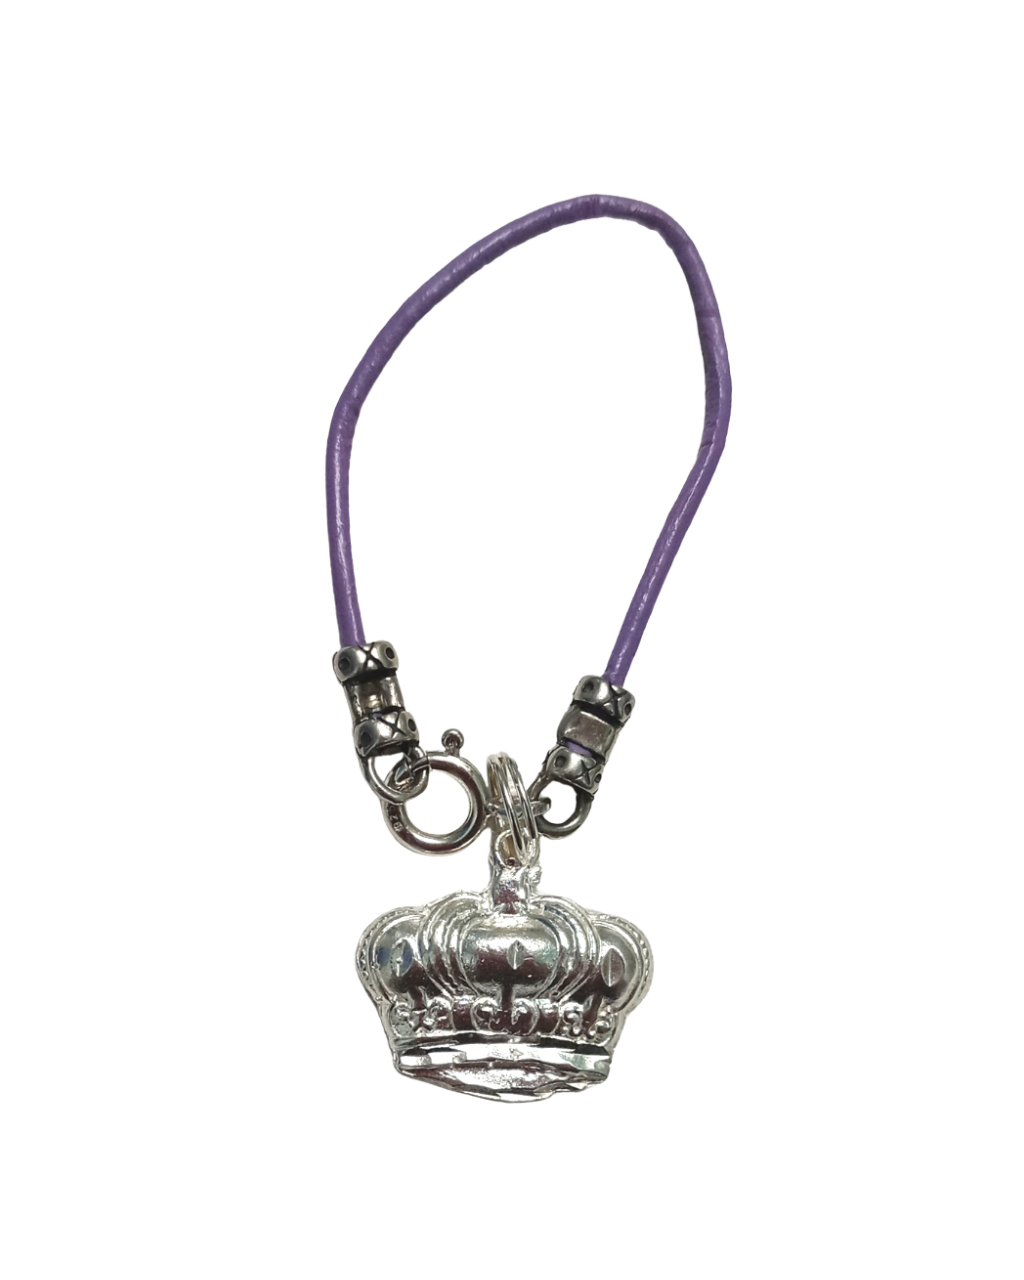 Mardi Gras King's Crown Removable Sterling Charm 15/16"L X 13/16"W on Leather KooLoop.